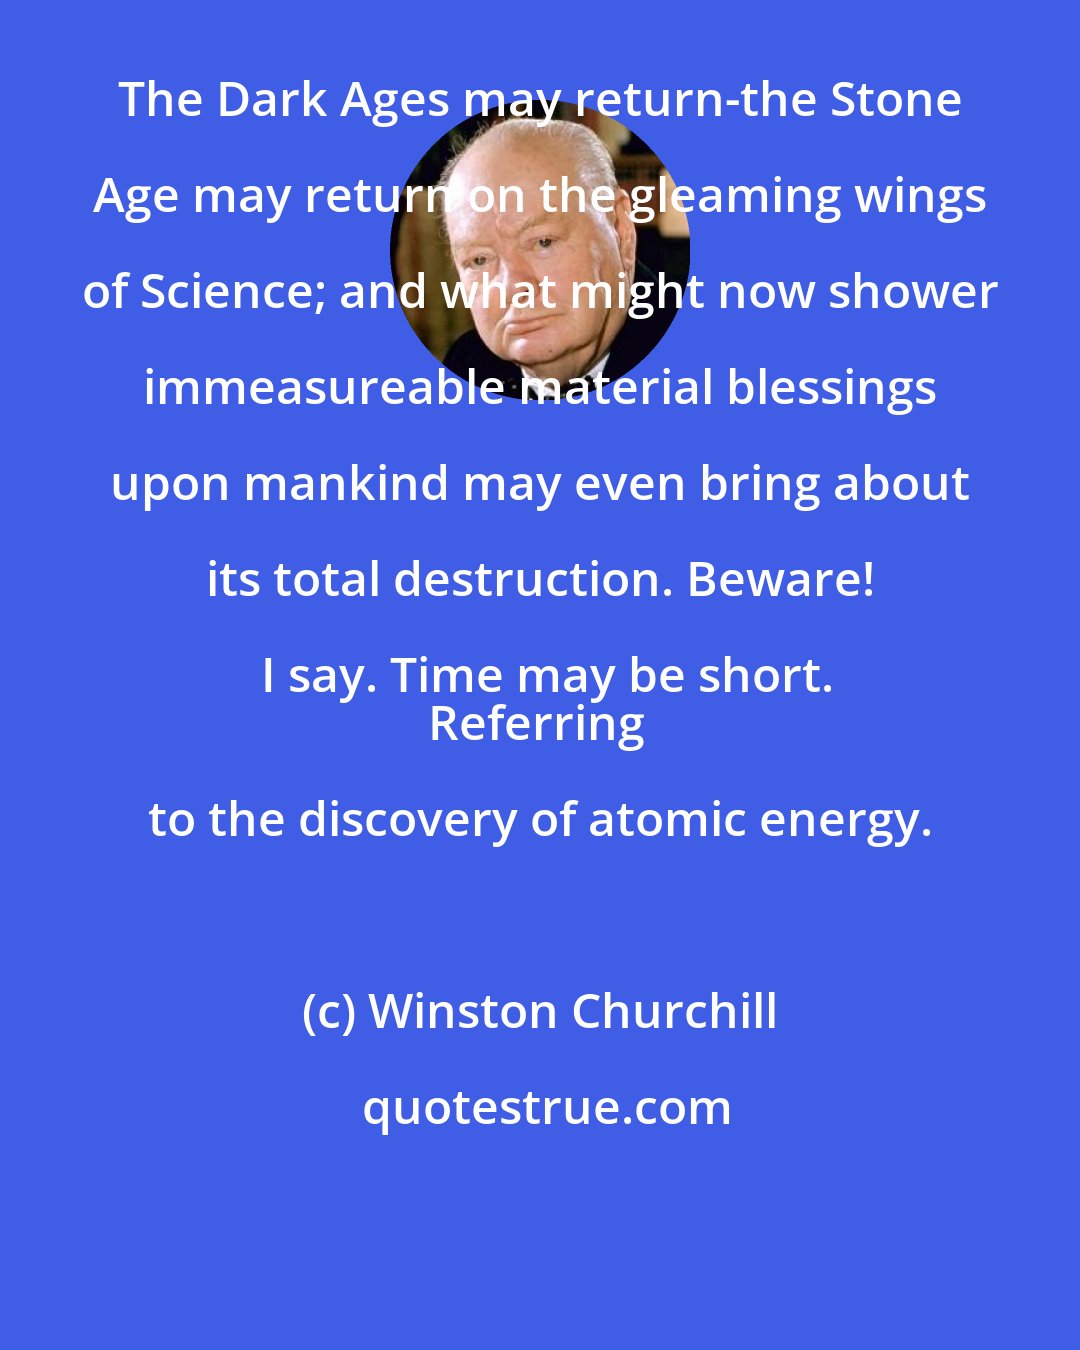 Winston Churchill: The Dark Ages may return-the Stone Age may return on the gleaming wings of Science; and what might now shower immeasureable material blessings upon mankind may even bring about its total destruction. Beware! I say. Time may be short.
Referring to the discovery of atomic energy.